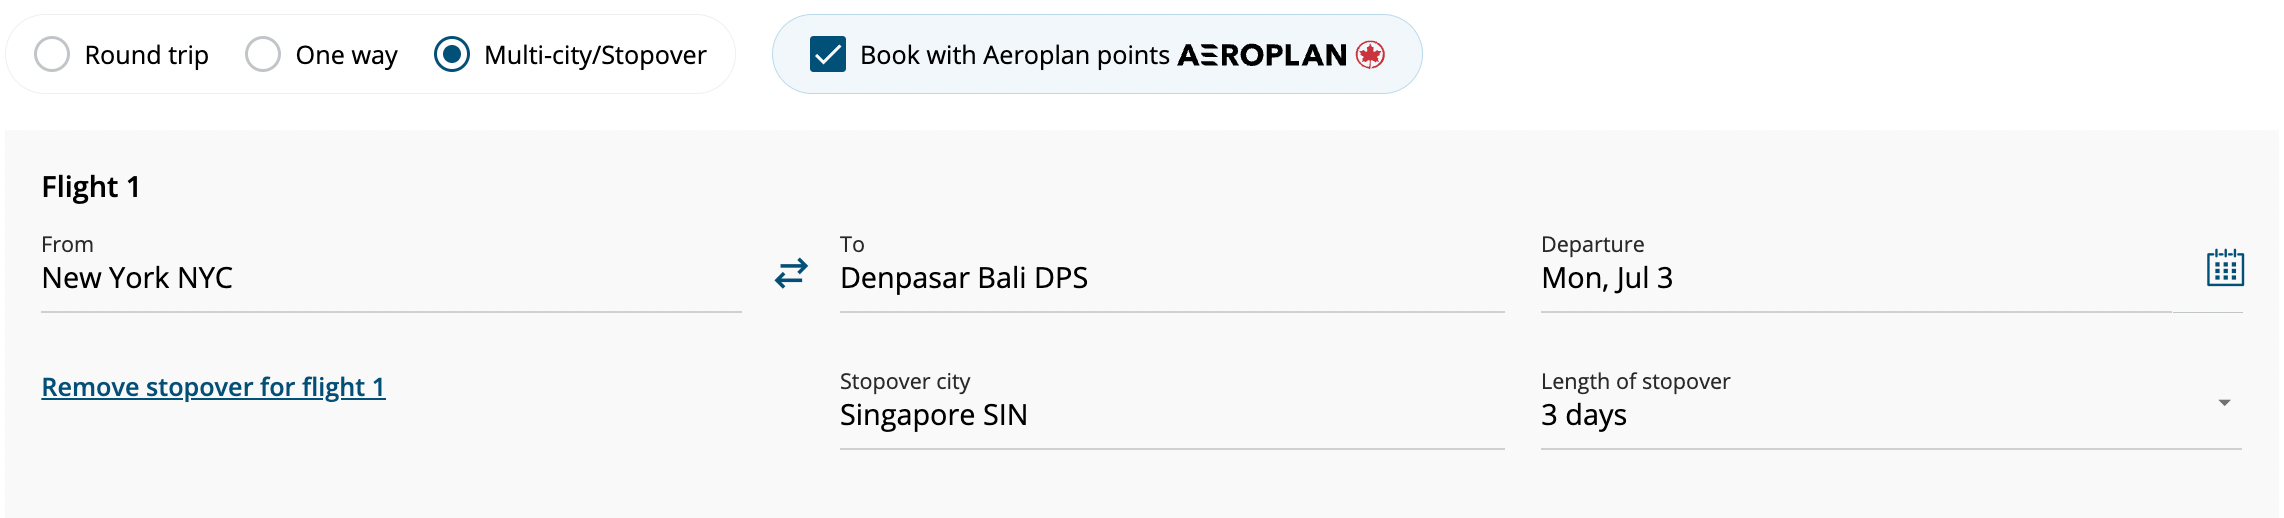 Entering information for an Aeroplan stopover